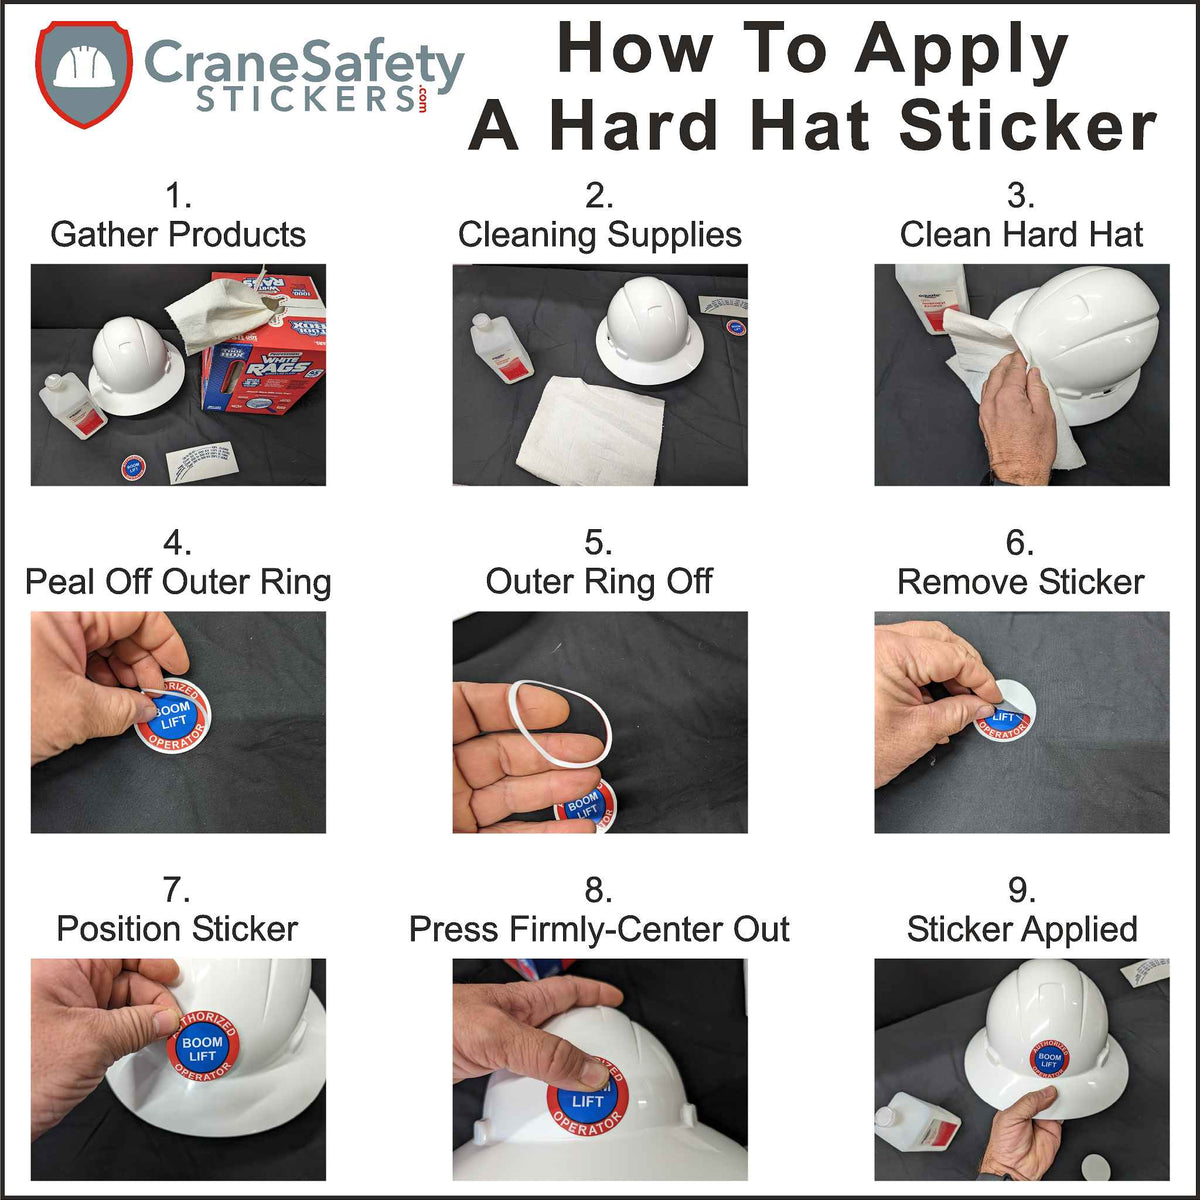 How to Apply Our EMT Firefighter Sticker On A Hard Hat.